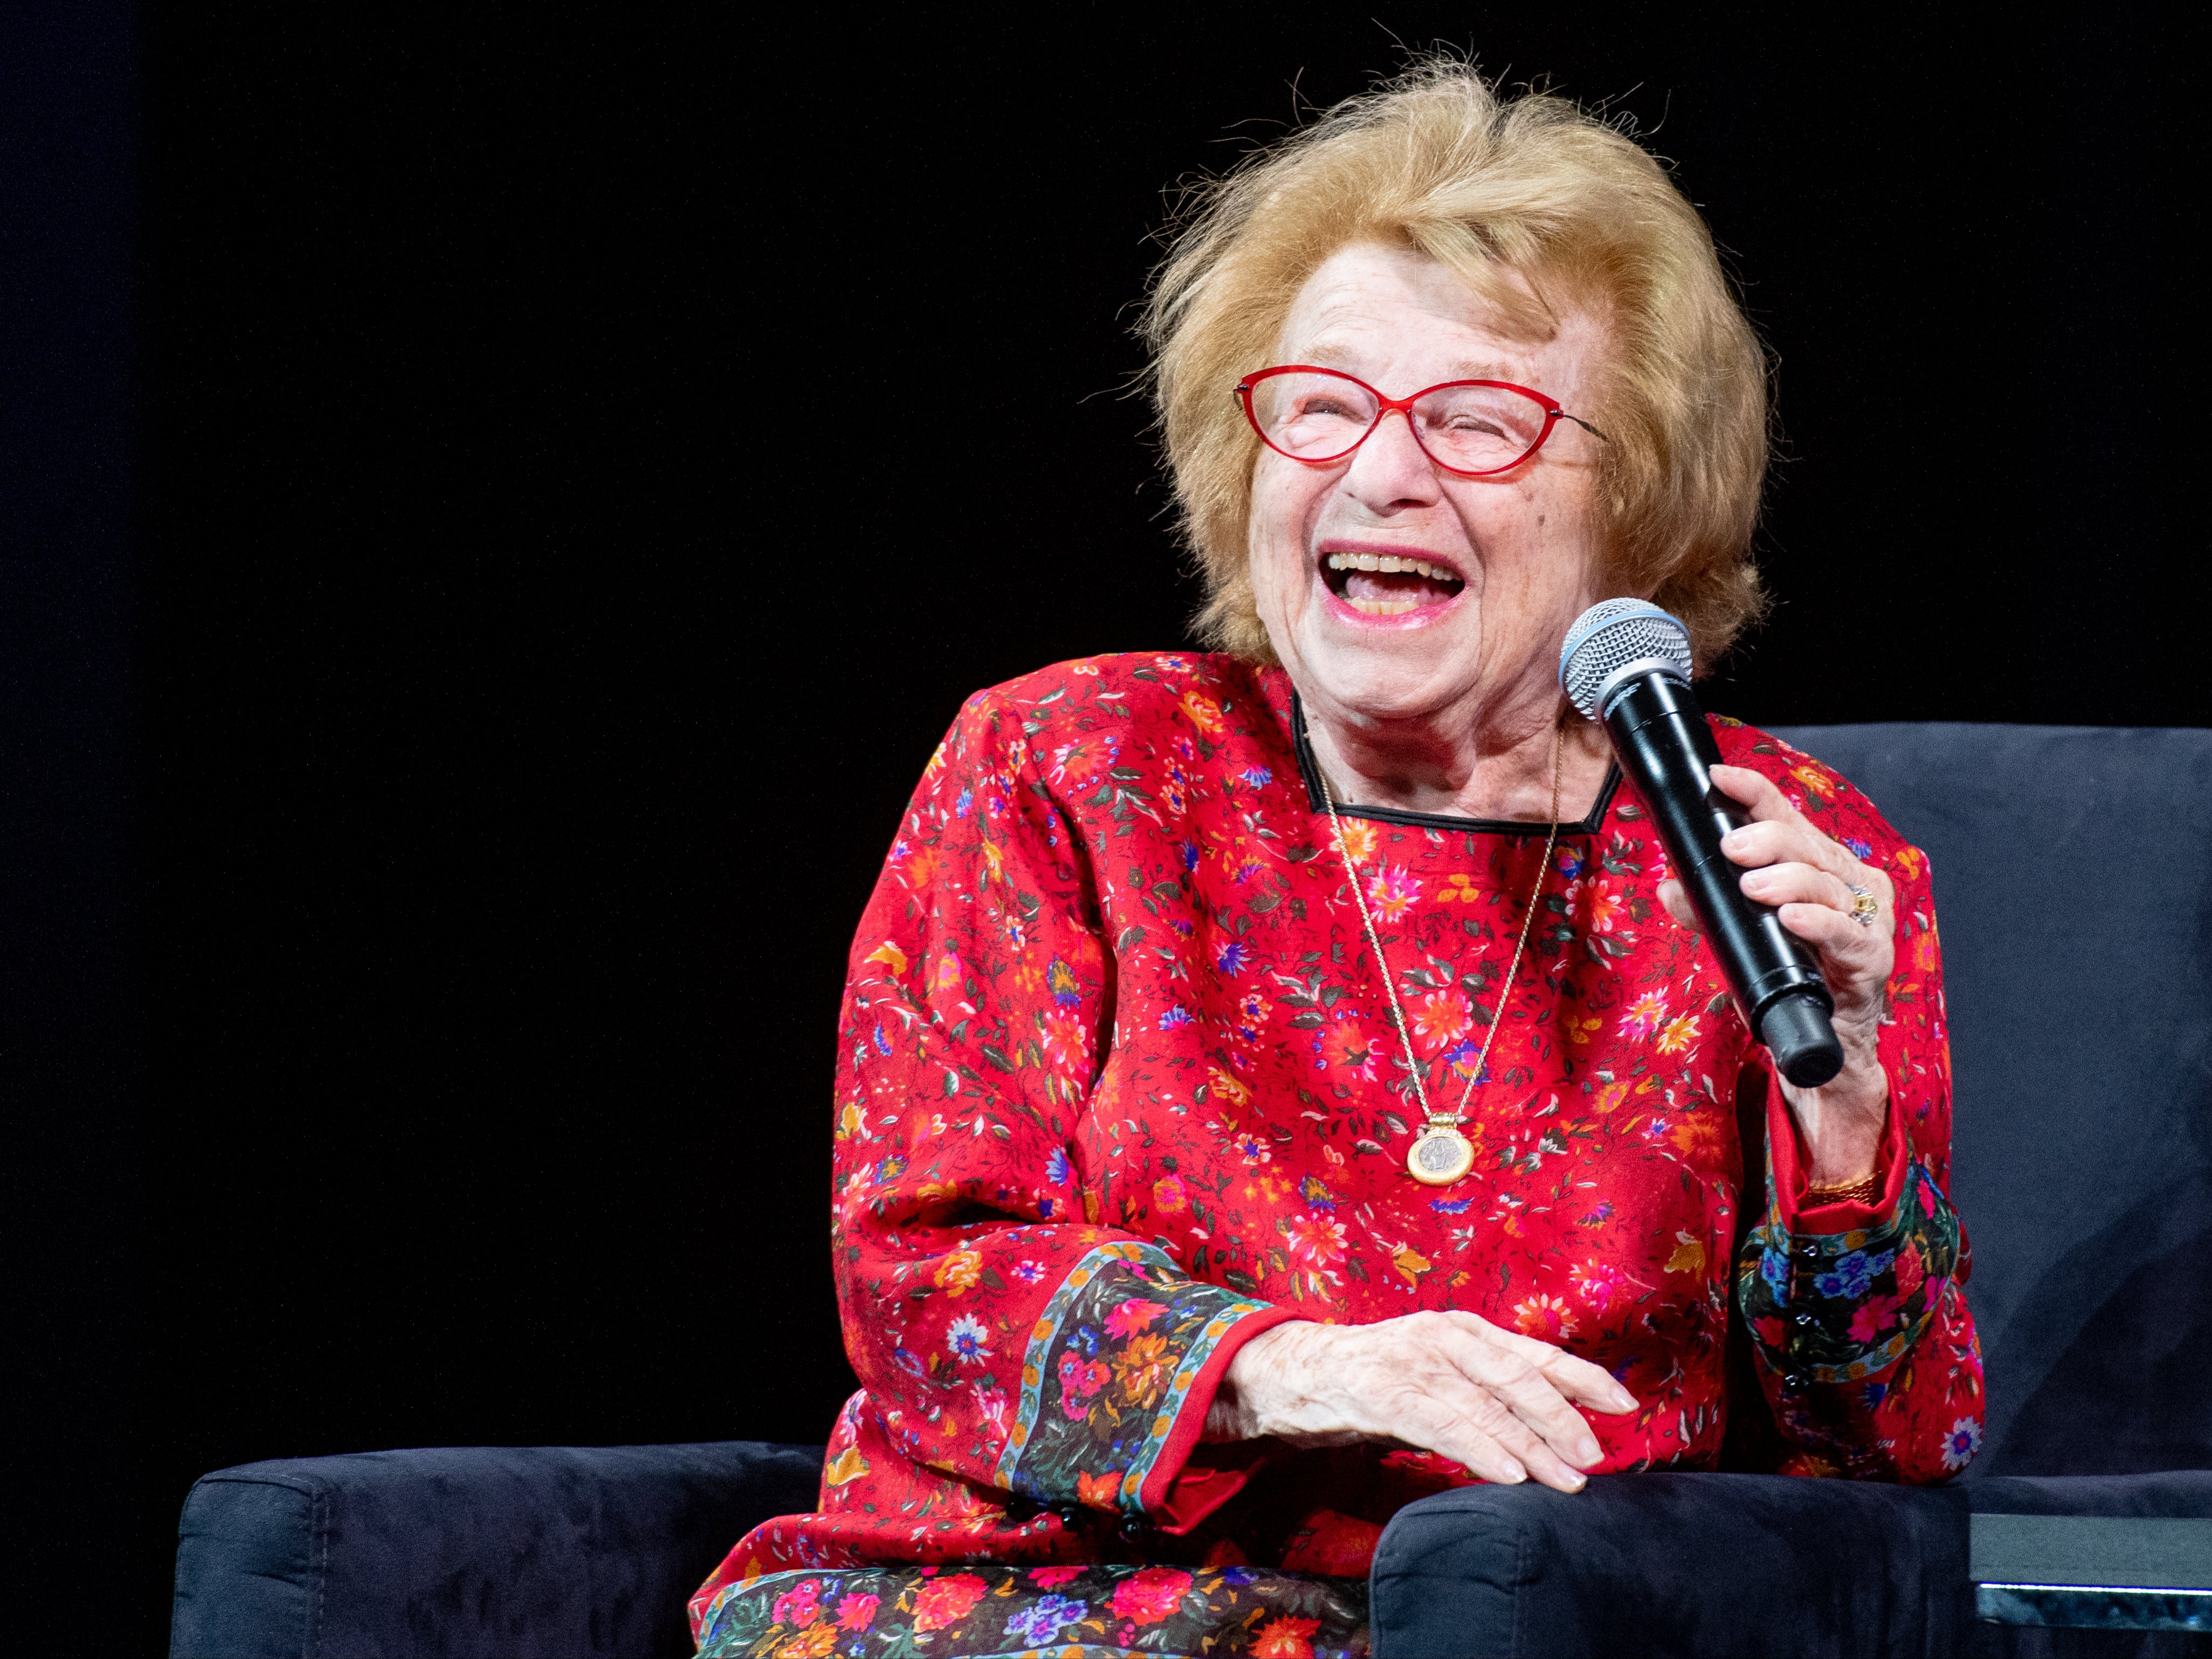 Dr Ruth Westheimer at the Tribeca Film Festival in April 2019 at the premiere of a documentary about her extraordinary life